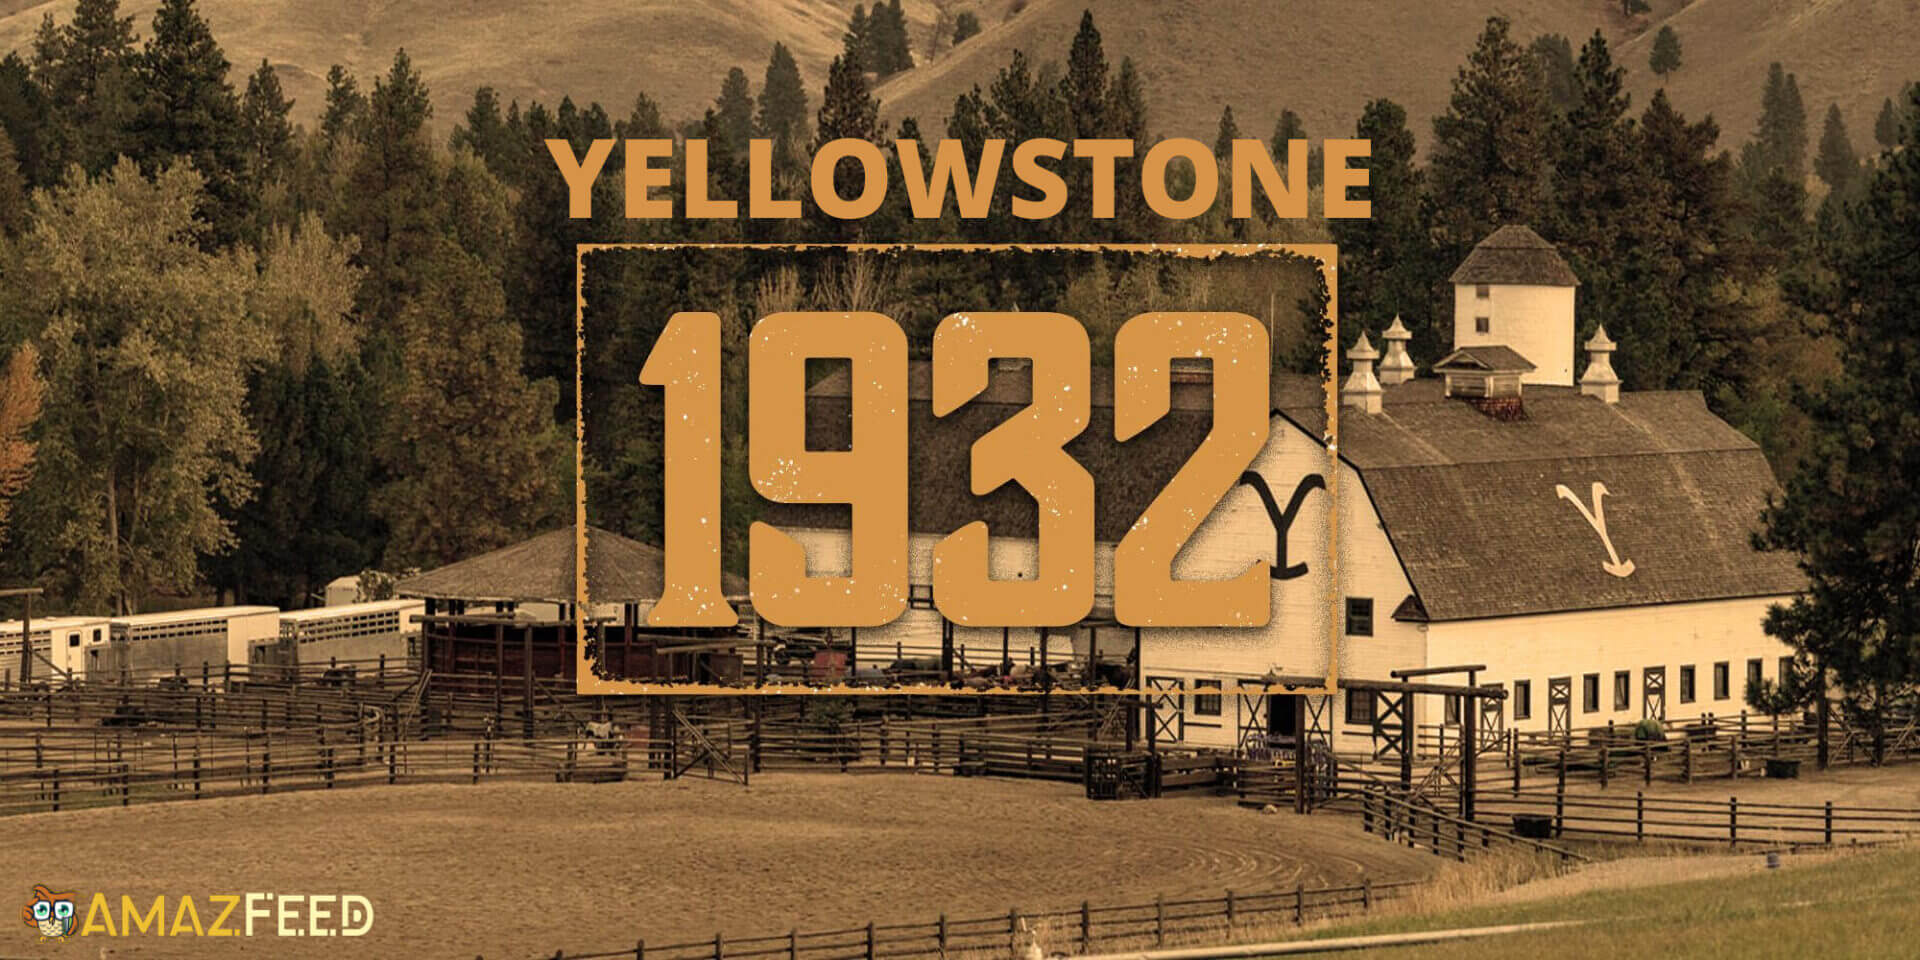 When Is 1932 Yellowstone Coming Out (Release Date)